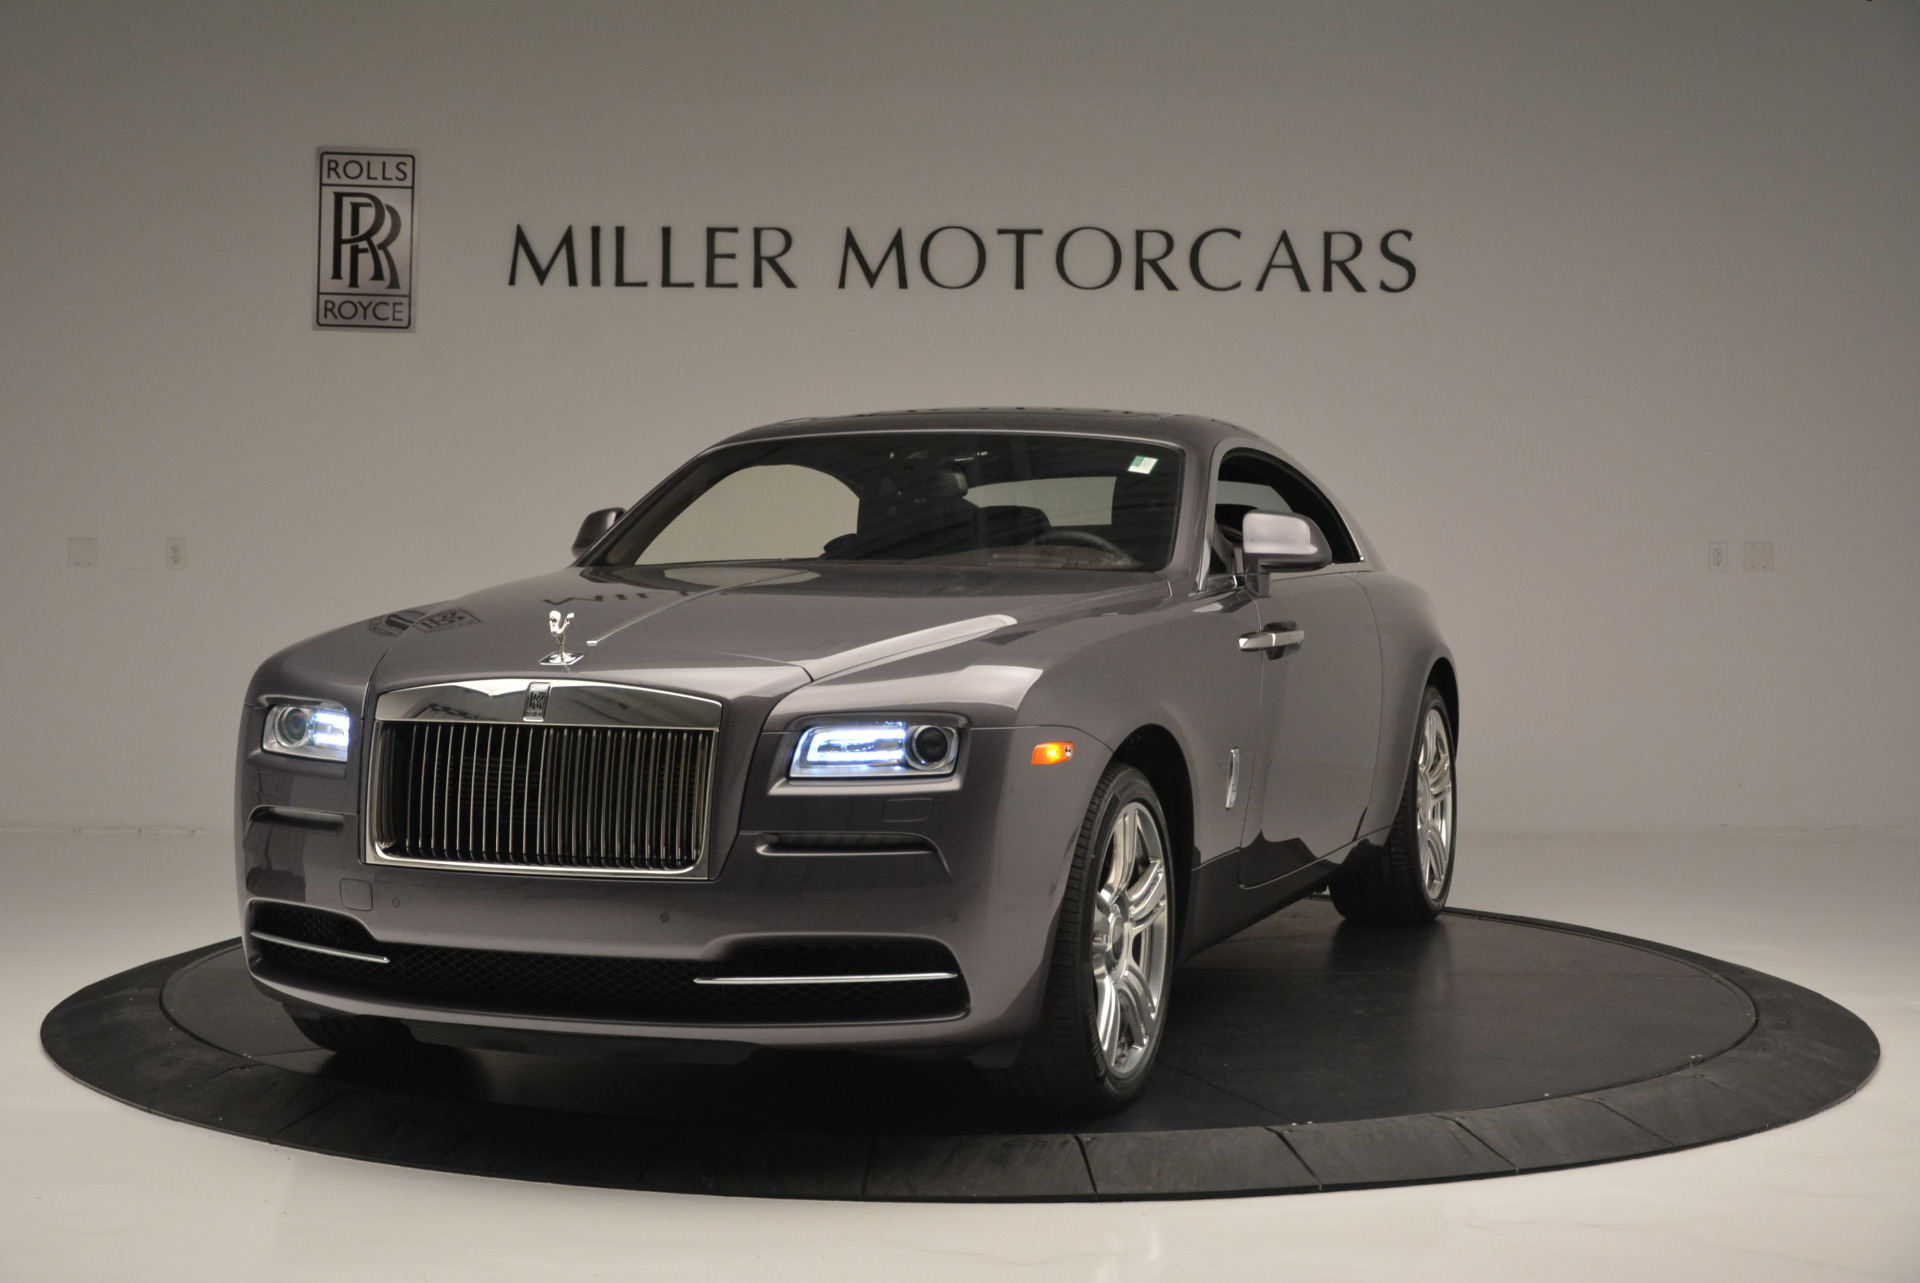 Used 2016 Rolls-Royce Wraith for sale Sold at Bentley Greenwich in Greenwich CT 06830 1